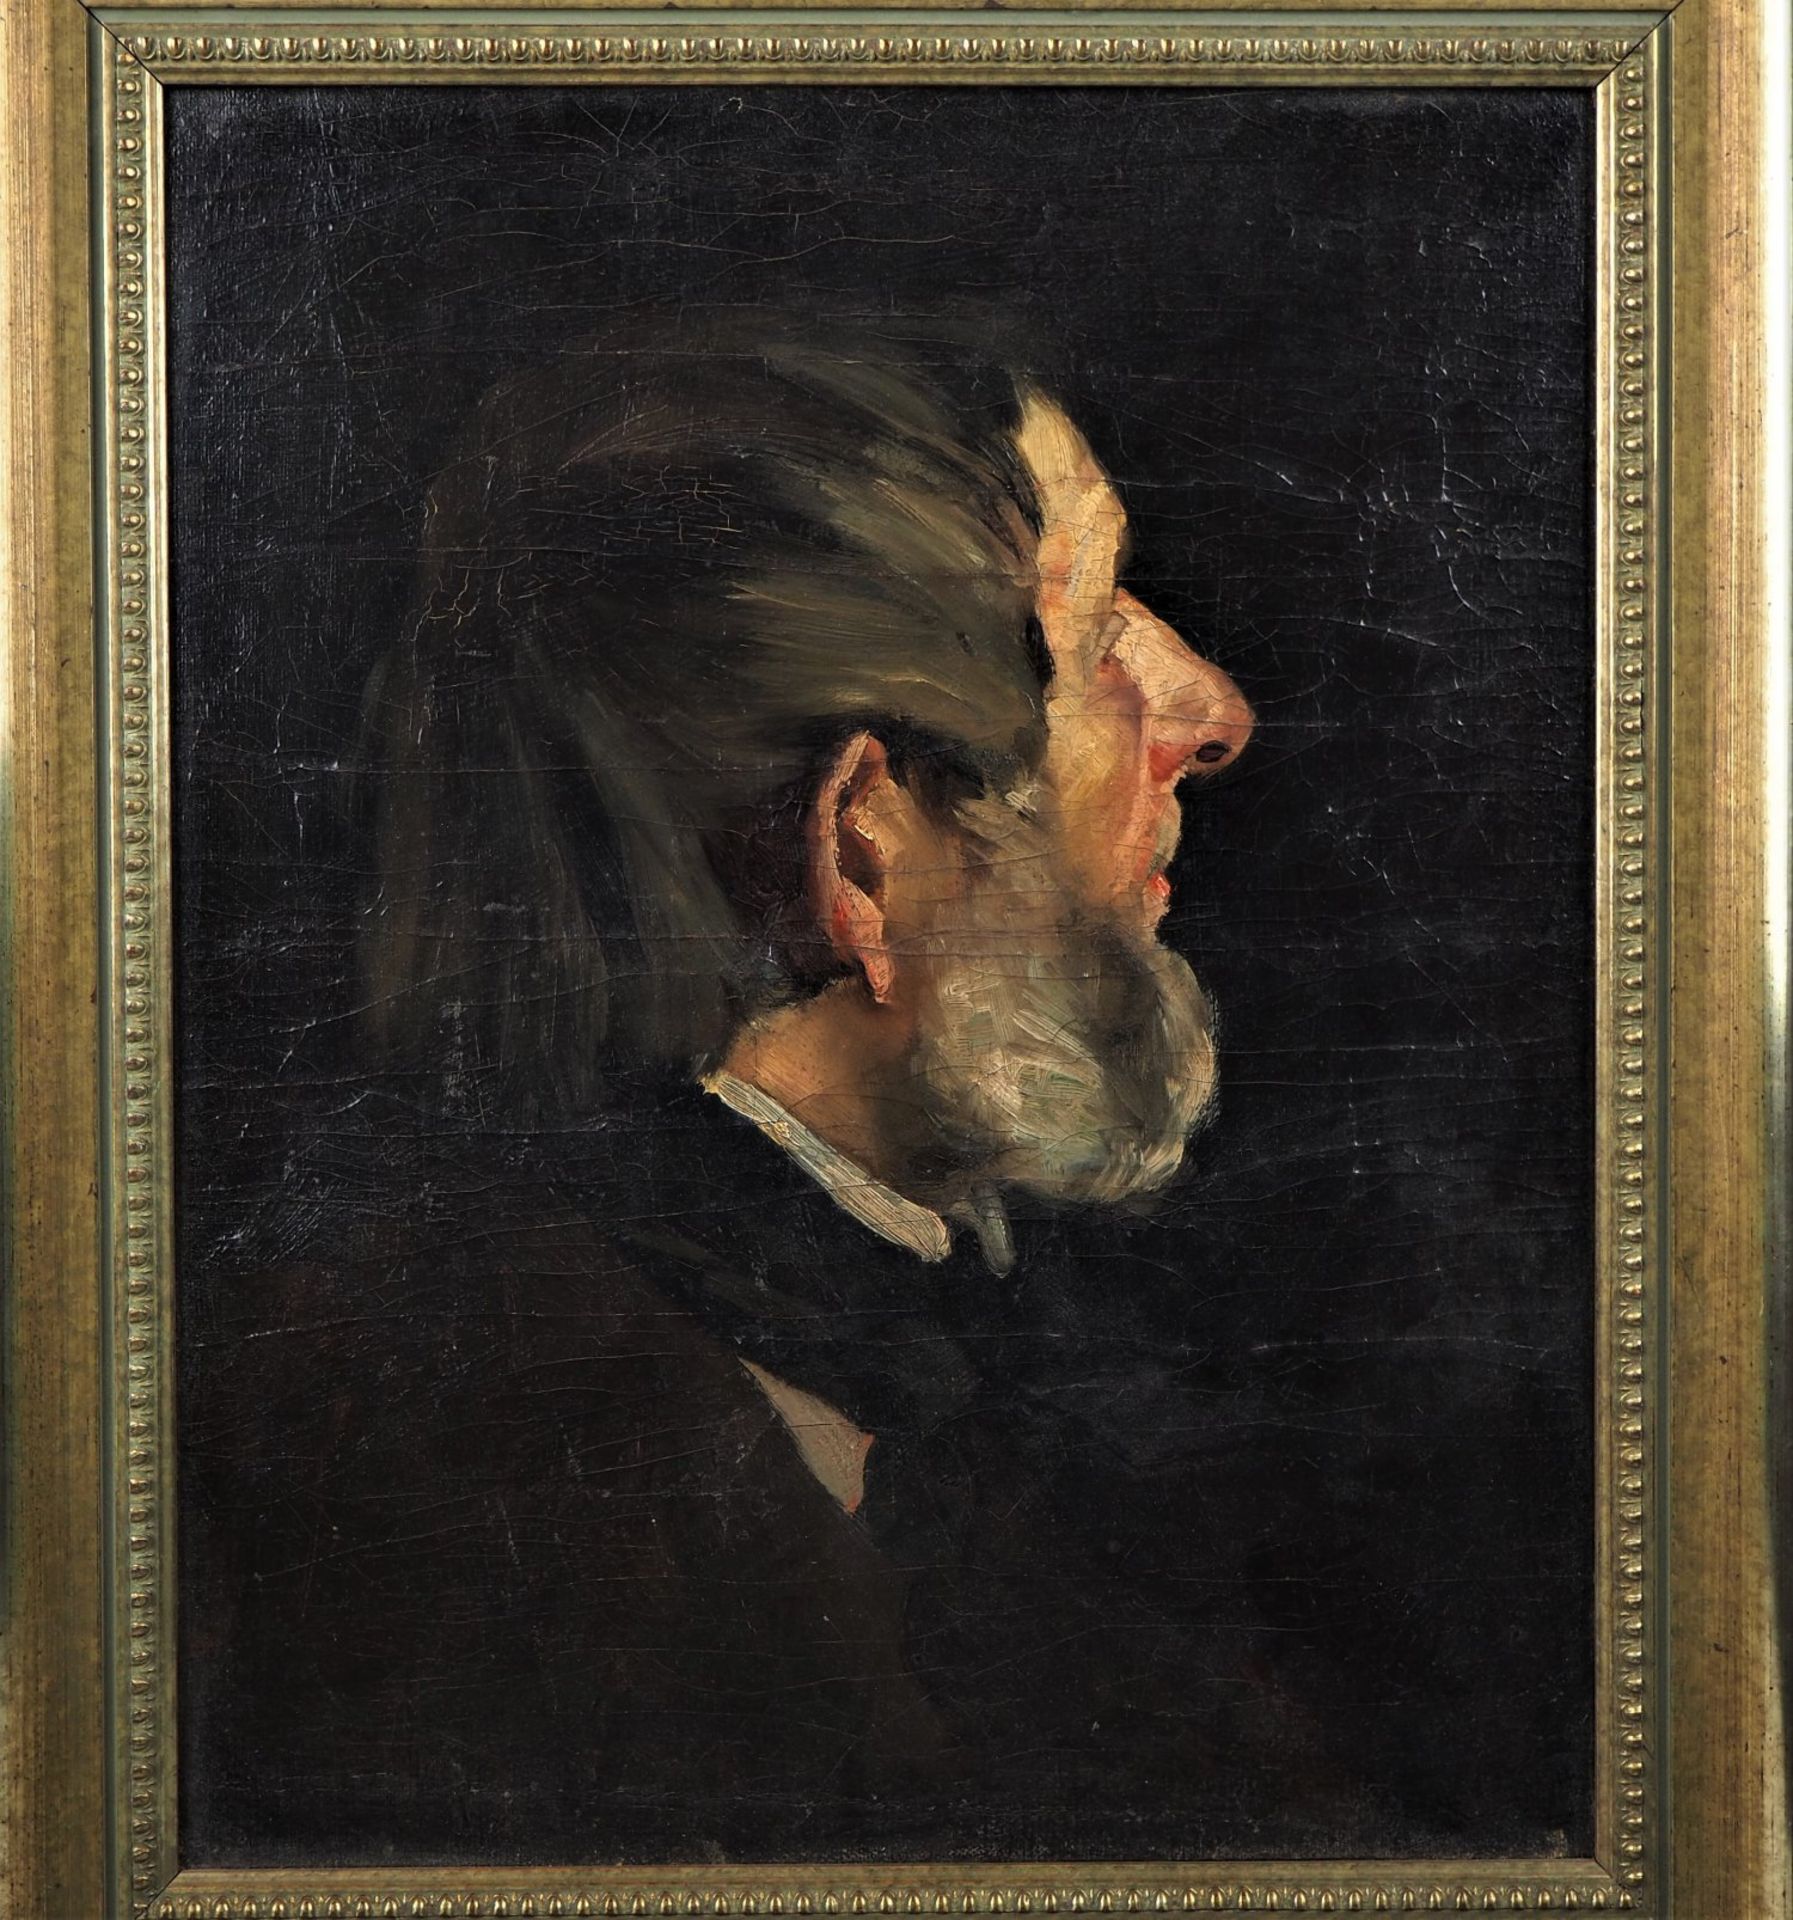 Wilhelm Leibl (1844-1900), Lost profile, 2nd half of the 19th century. - Image 2 of 5